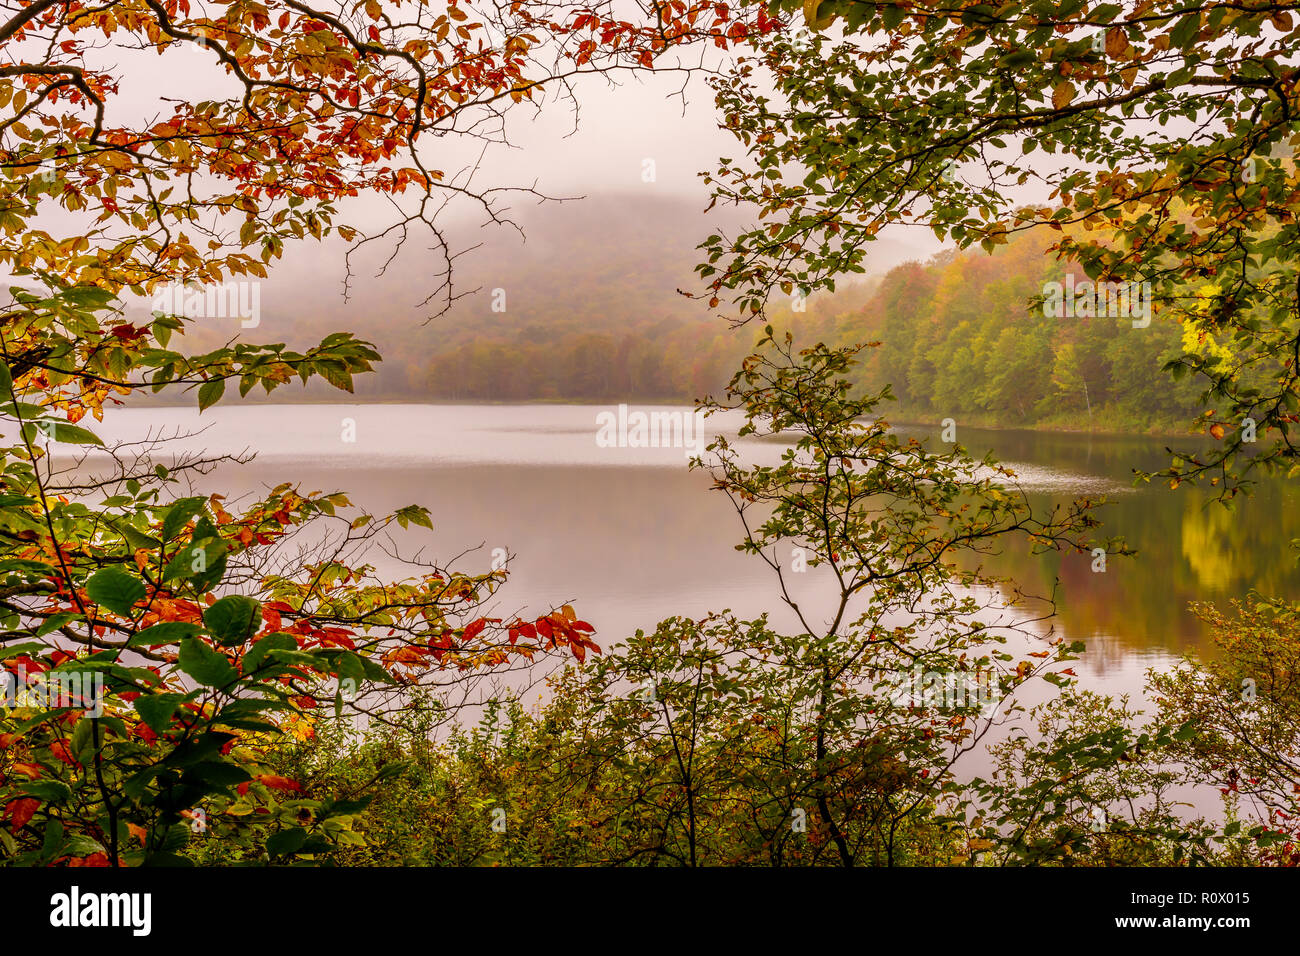 Big Pond in the Catskill Mountains of New York State with an early morning fog and trees changing colors in the autumn.. Stock Photo